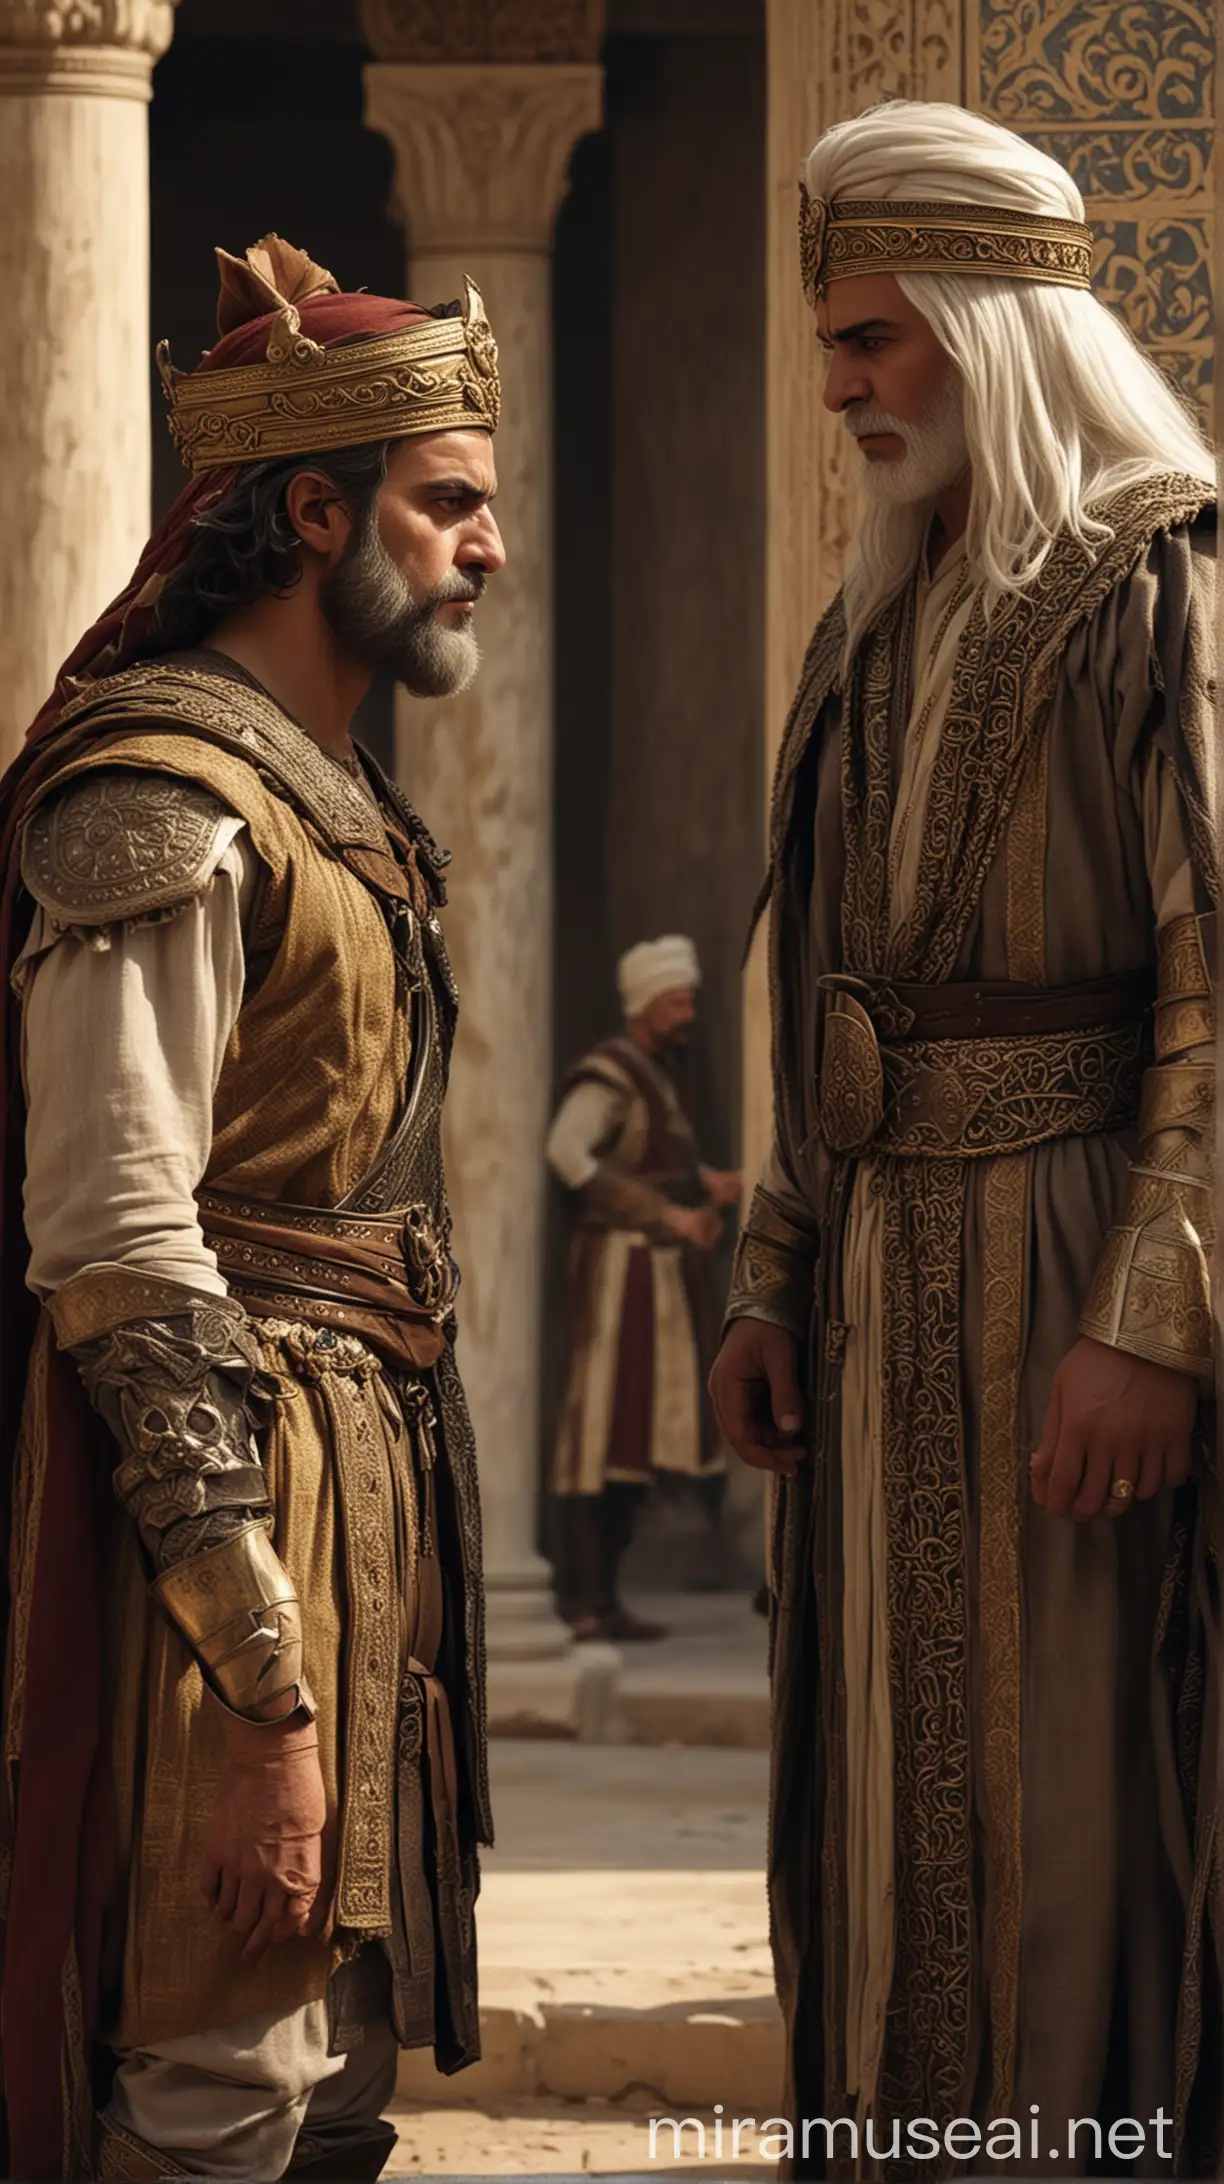 A tense standoff between Ephialtes and Xerxes, the Persian king considering the traitor's words with a mix of suspicion and intrigue. hyper realistic